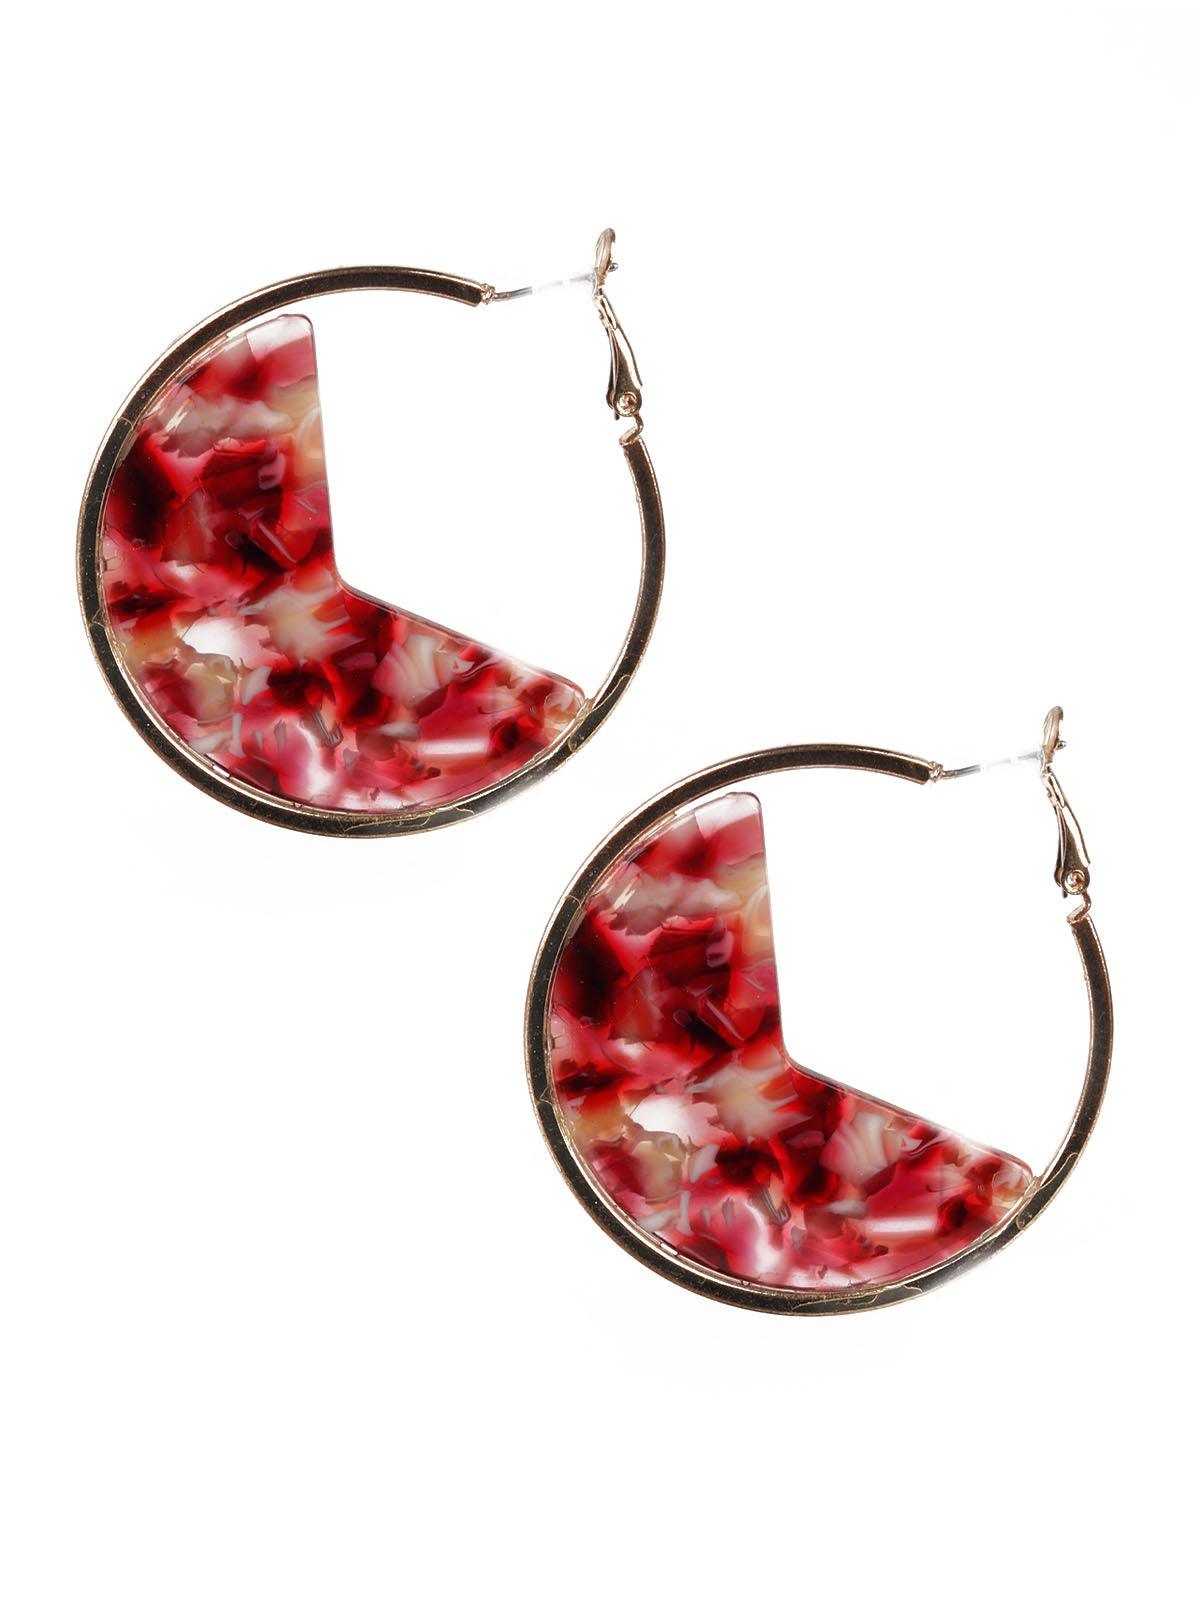 RED AND GOLD HOOP EARRINGS - Odette